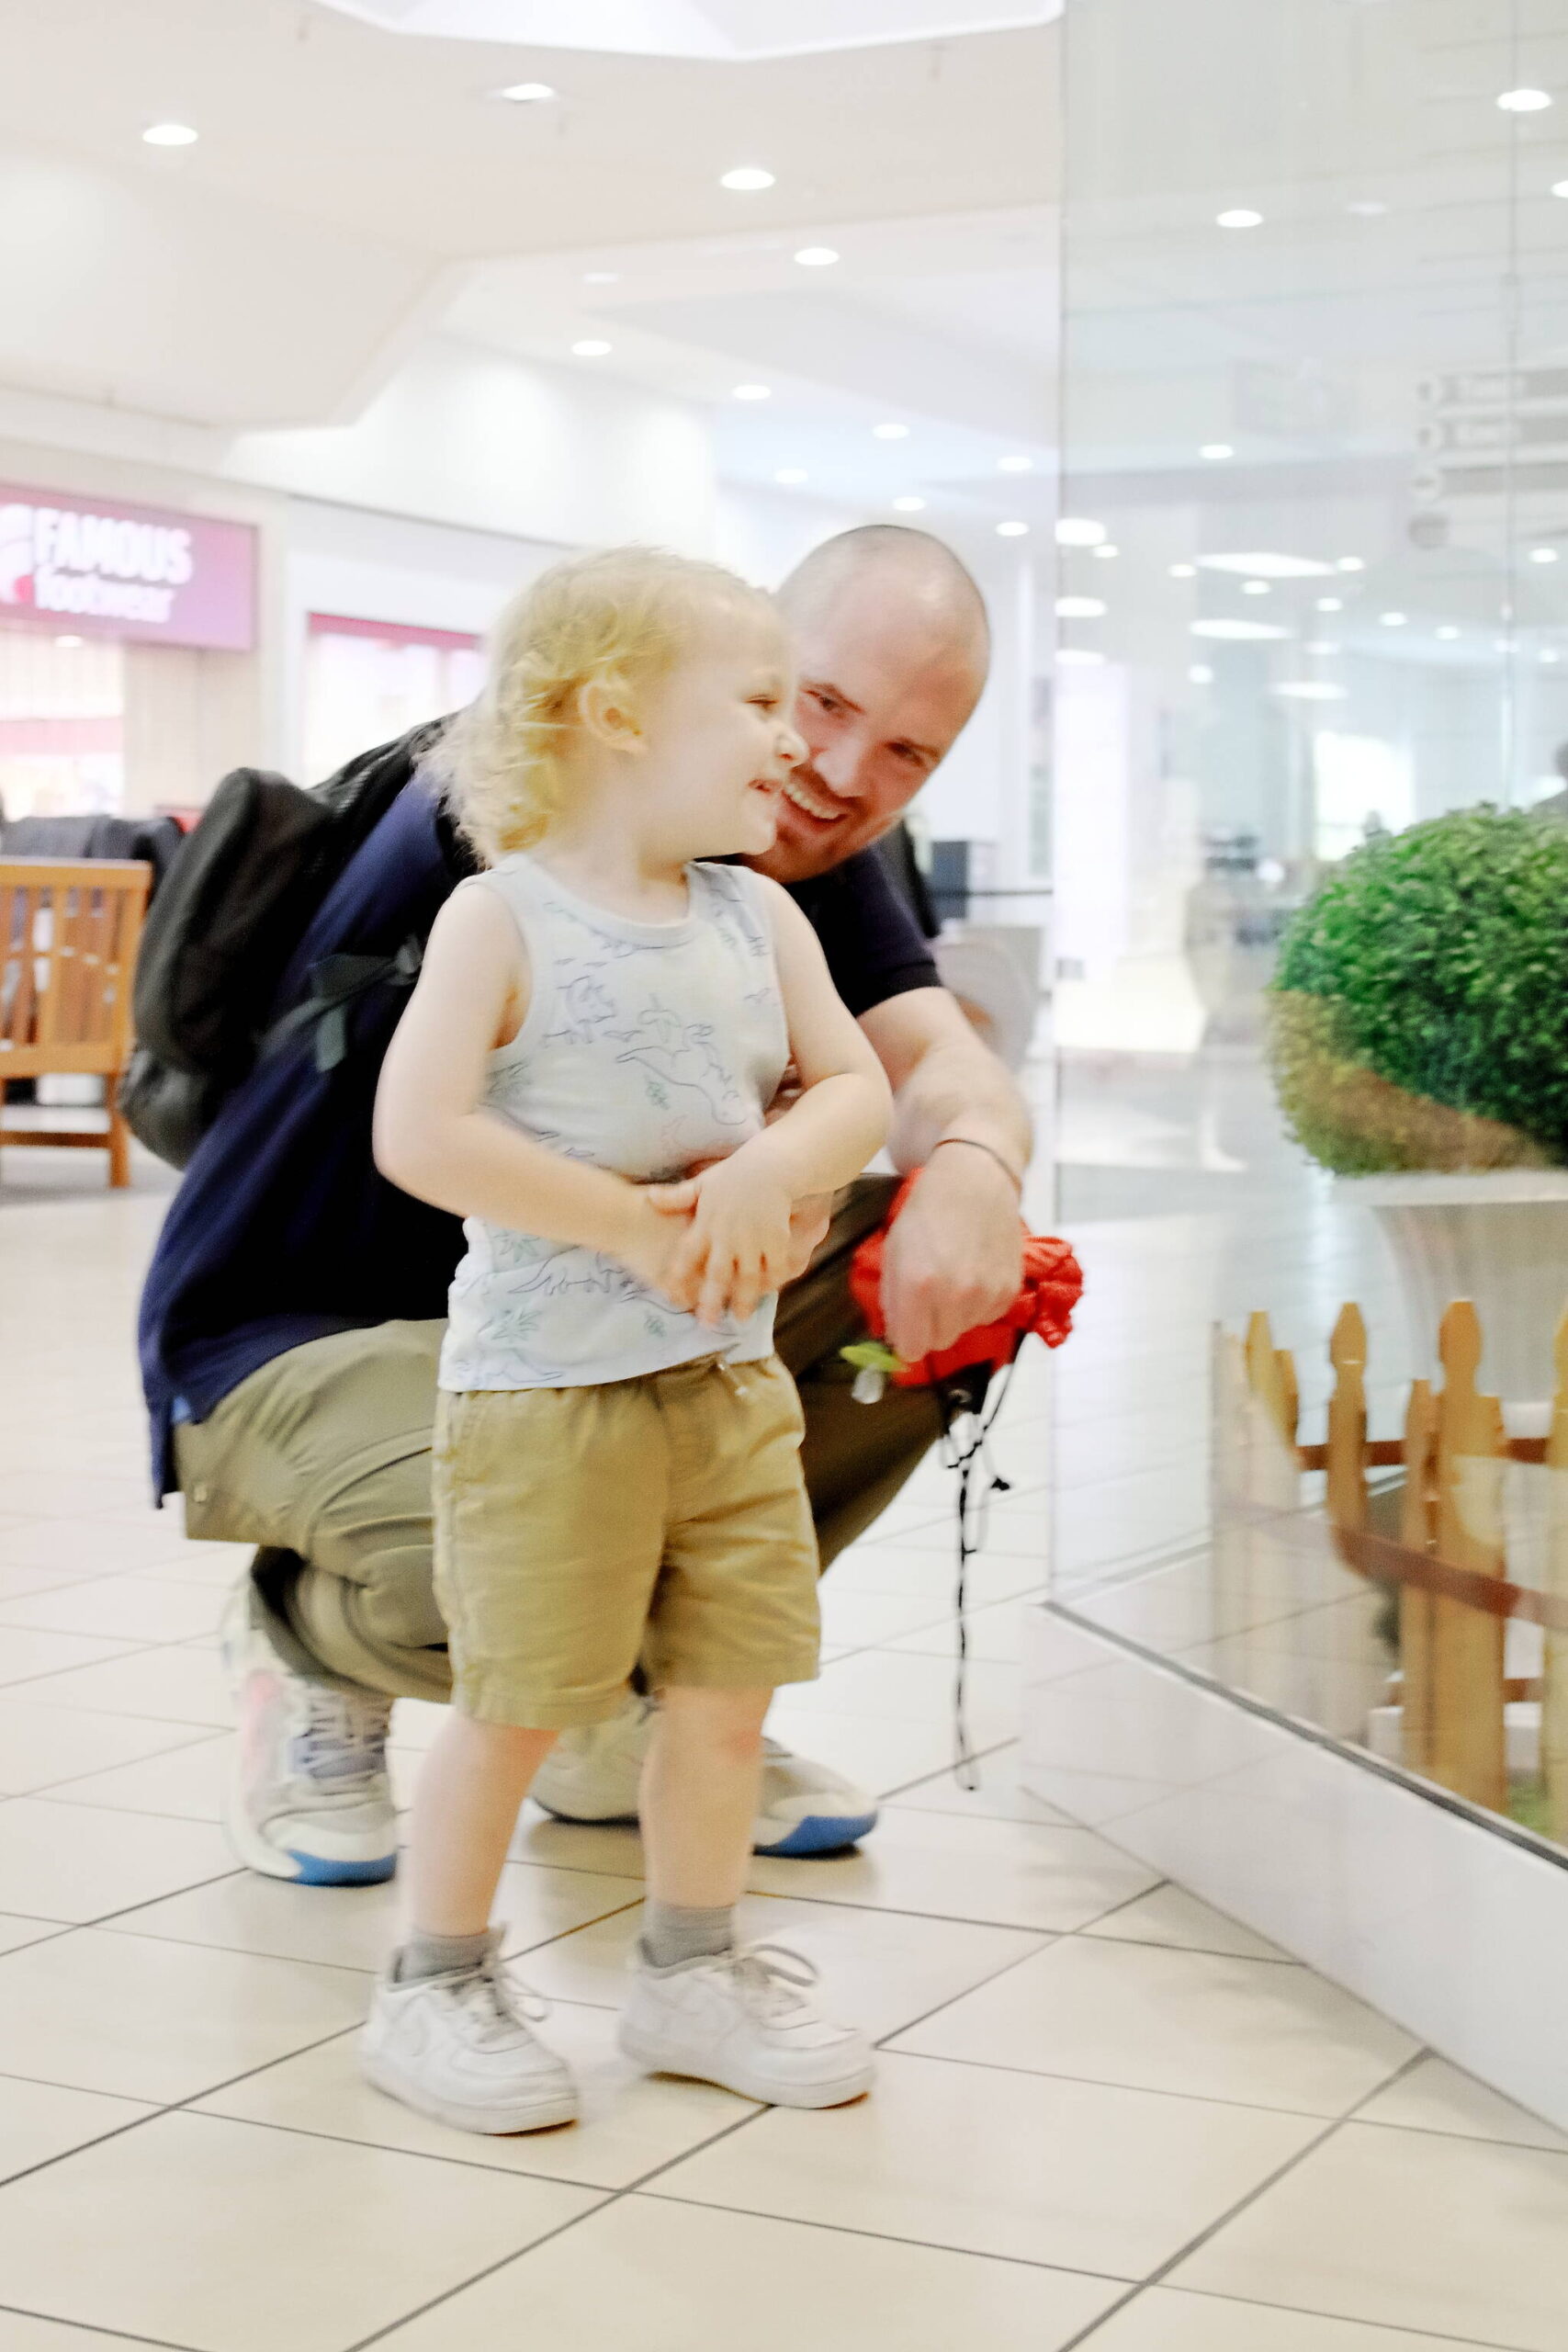 Photo by Keelin Everly-Lang / The Mirror
Jared Gloster and son Gavin at the Commons Mall in Federal Way.